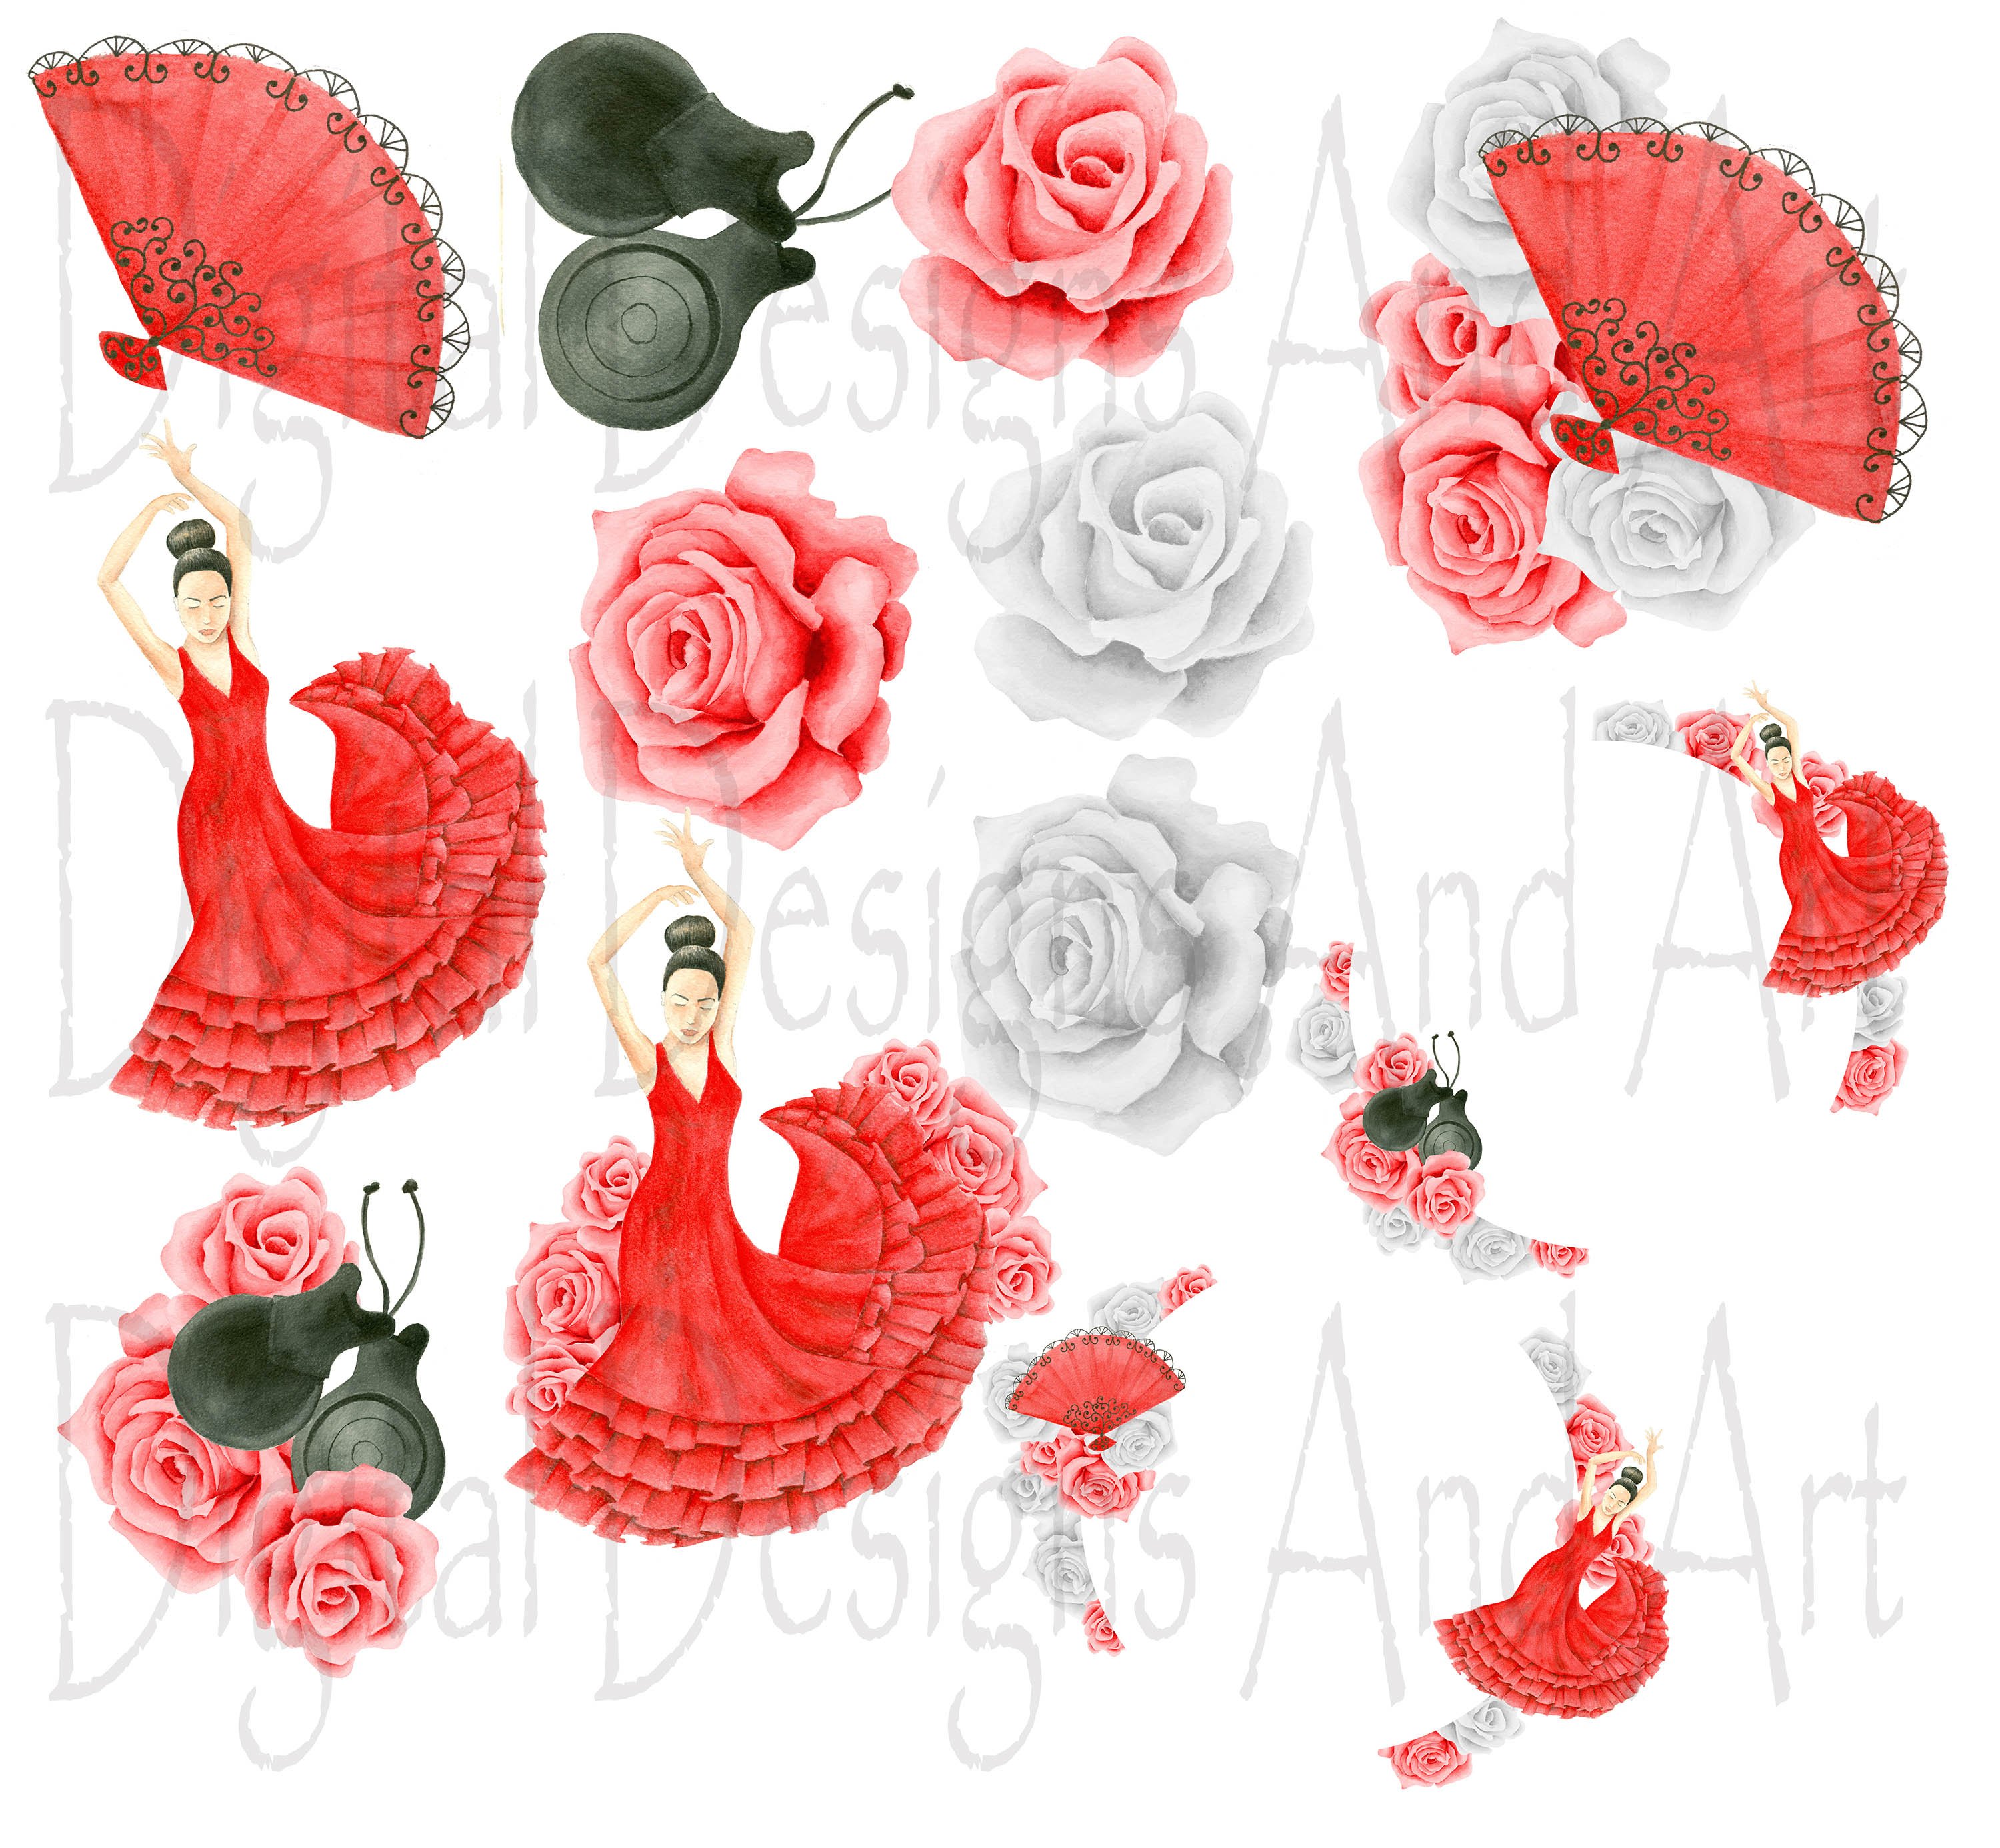 Flamenco in red preview image.